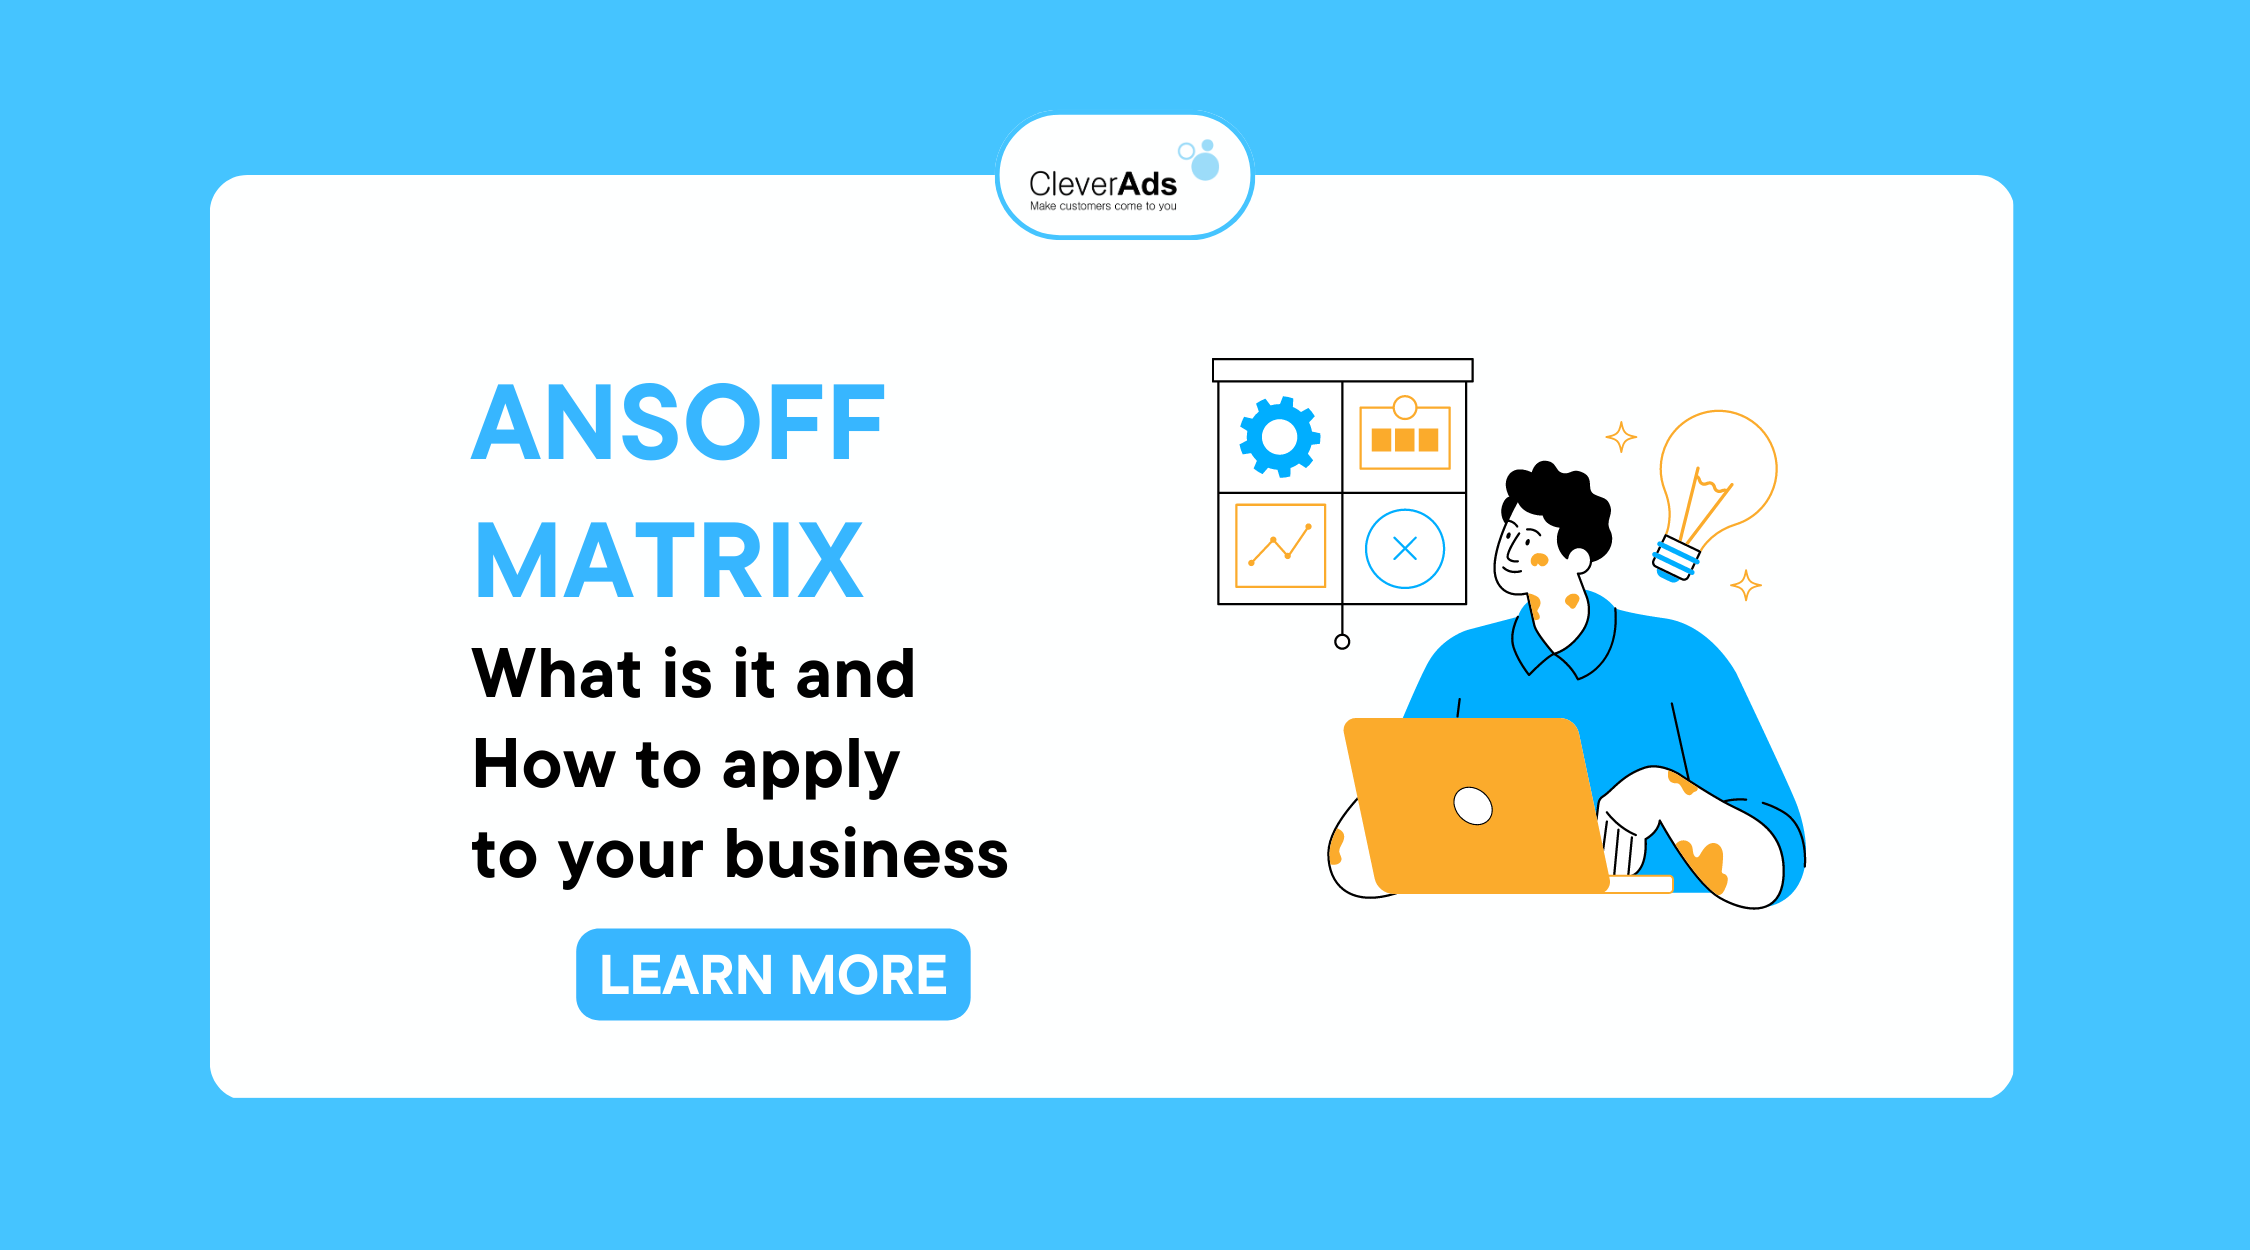 Ansoff Matrix: What is it and How to apply to your business